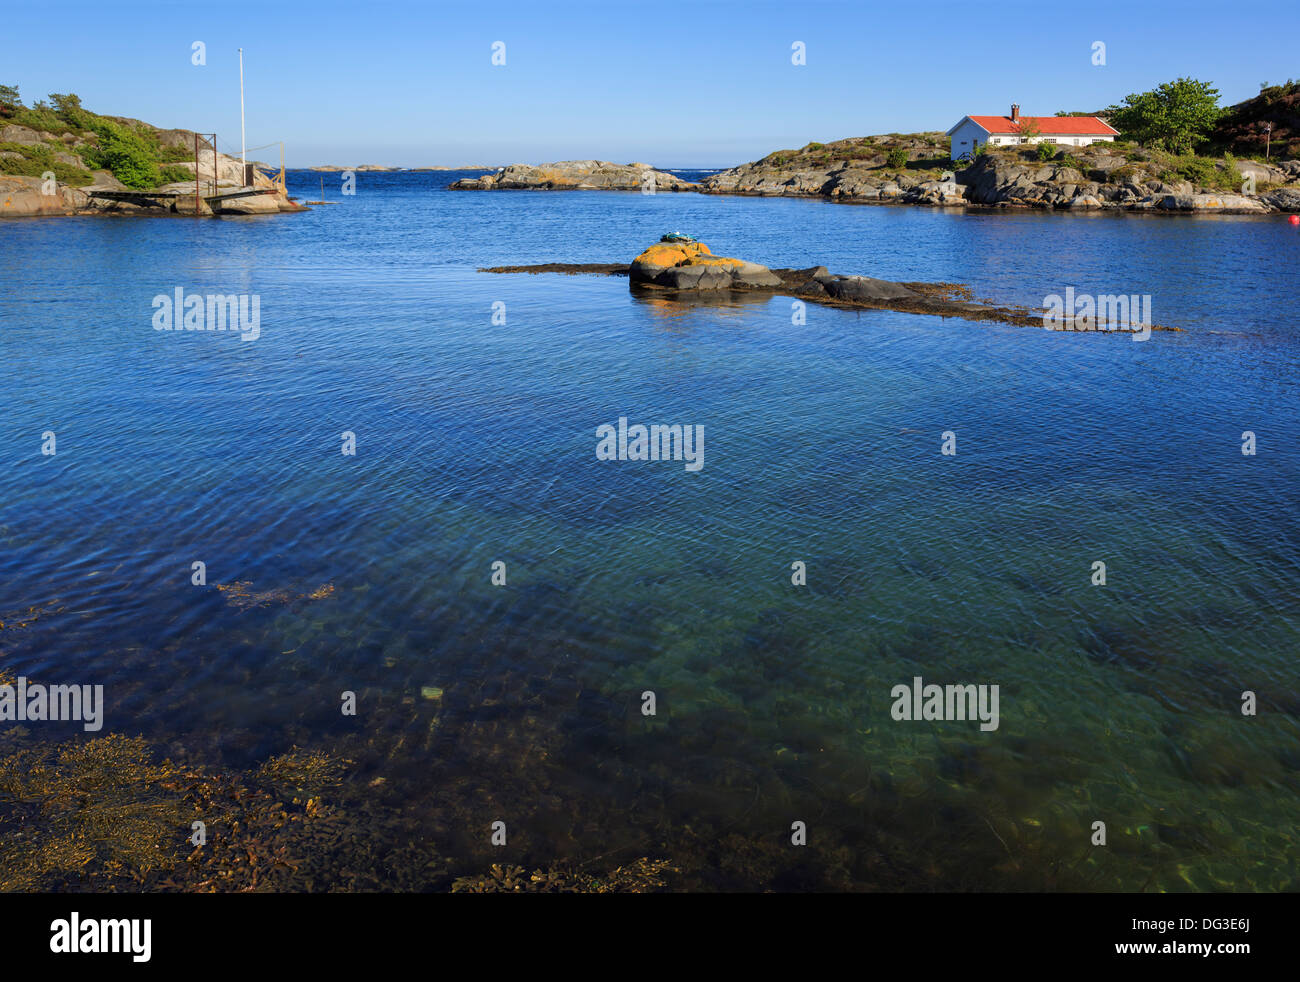 Scene in a rocky cove on the south coast. Hovag, Kristiansand, Norway, Scandinavia, Europe Stock Photo